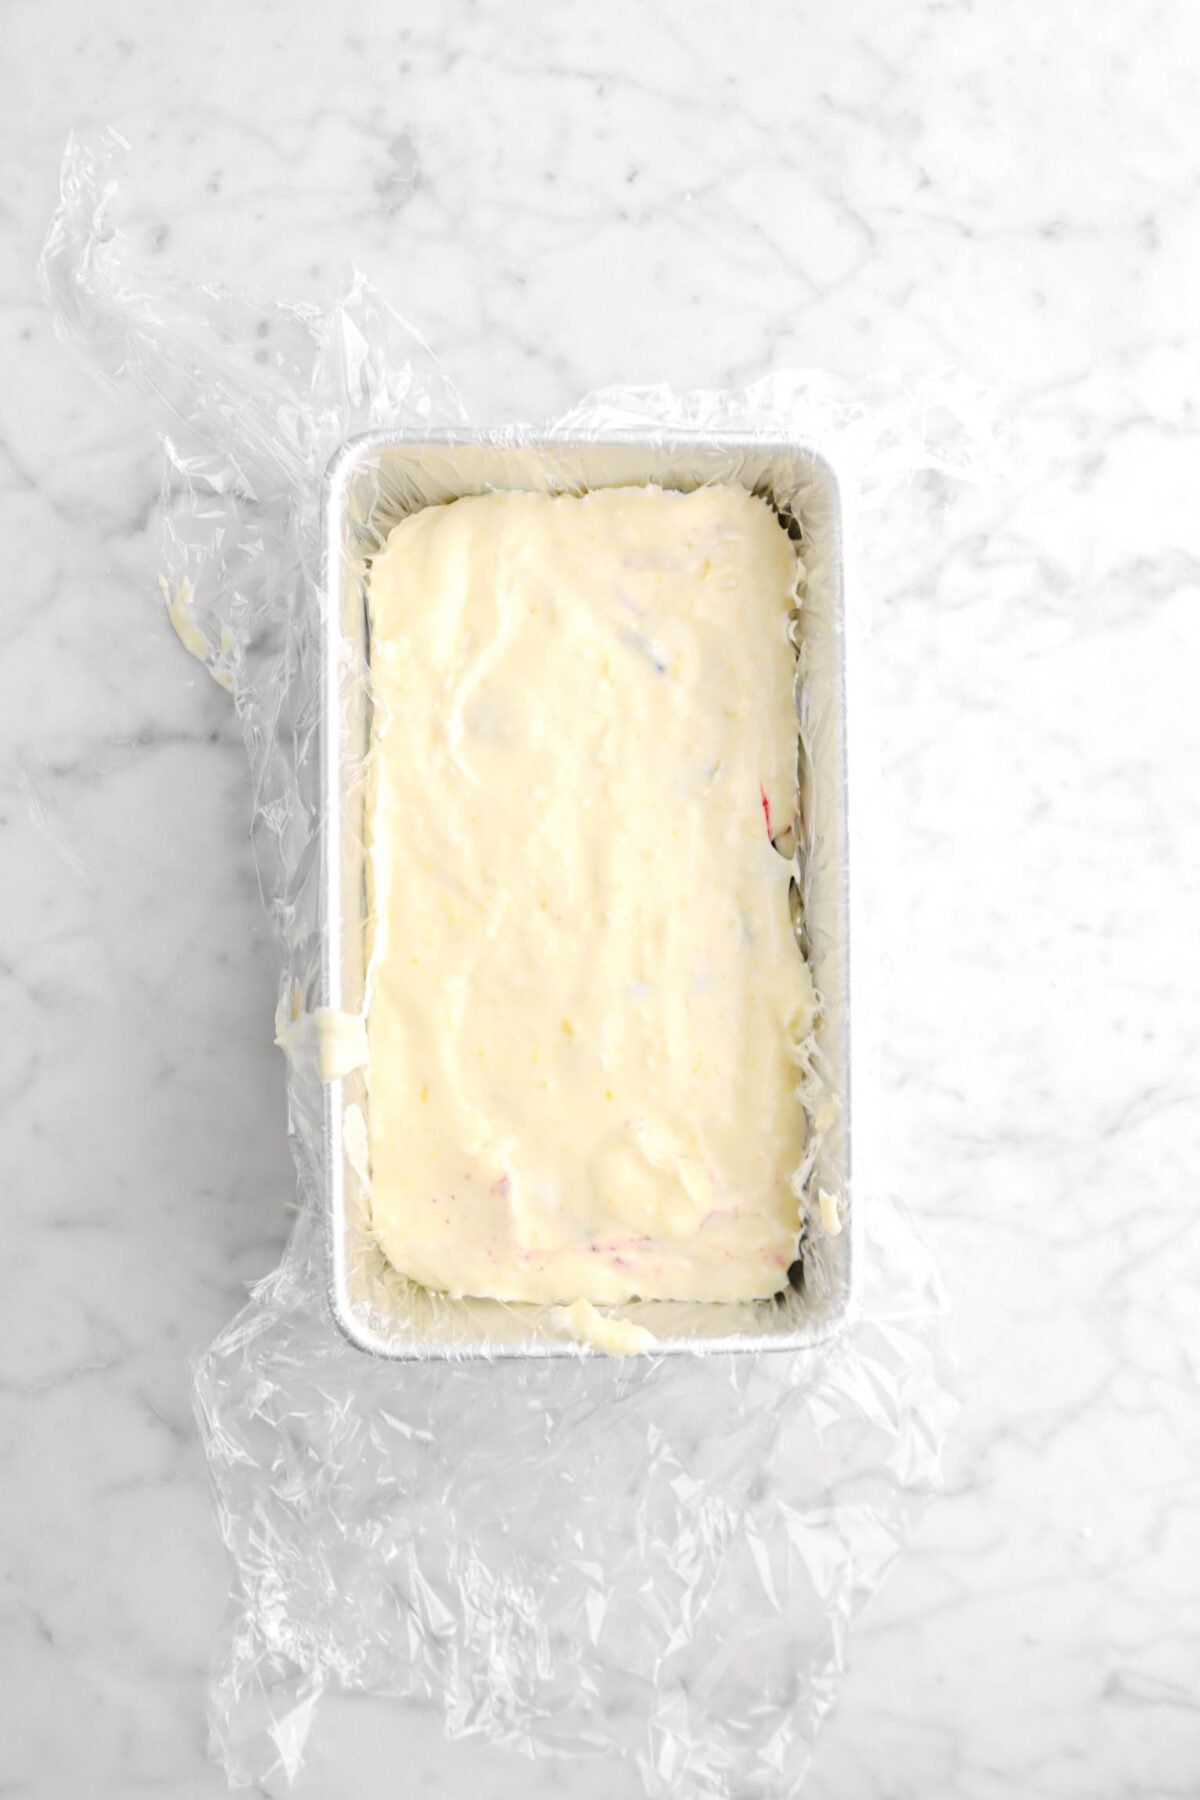 lemon mousse covering jam layer in loaf pan